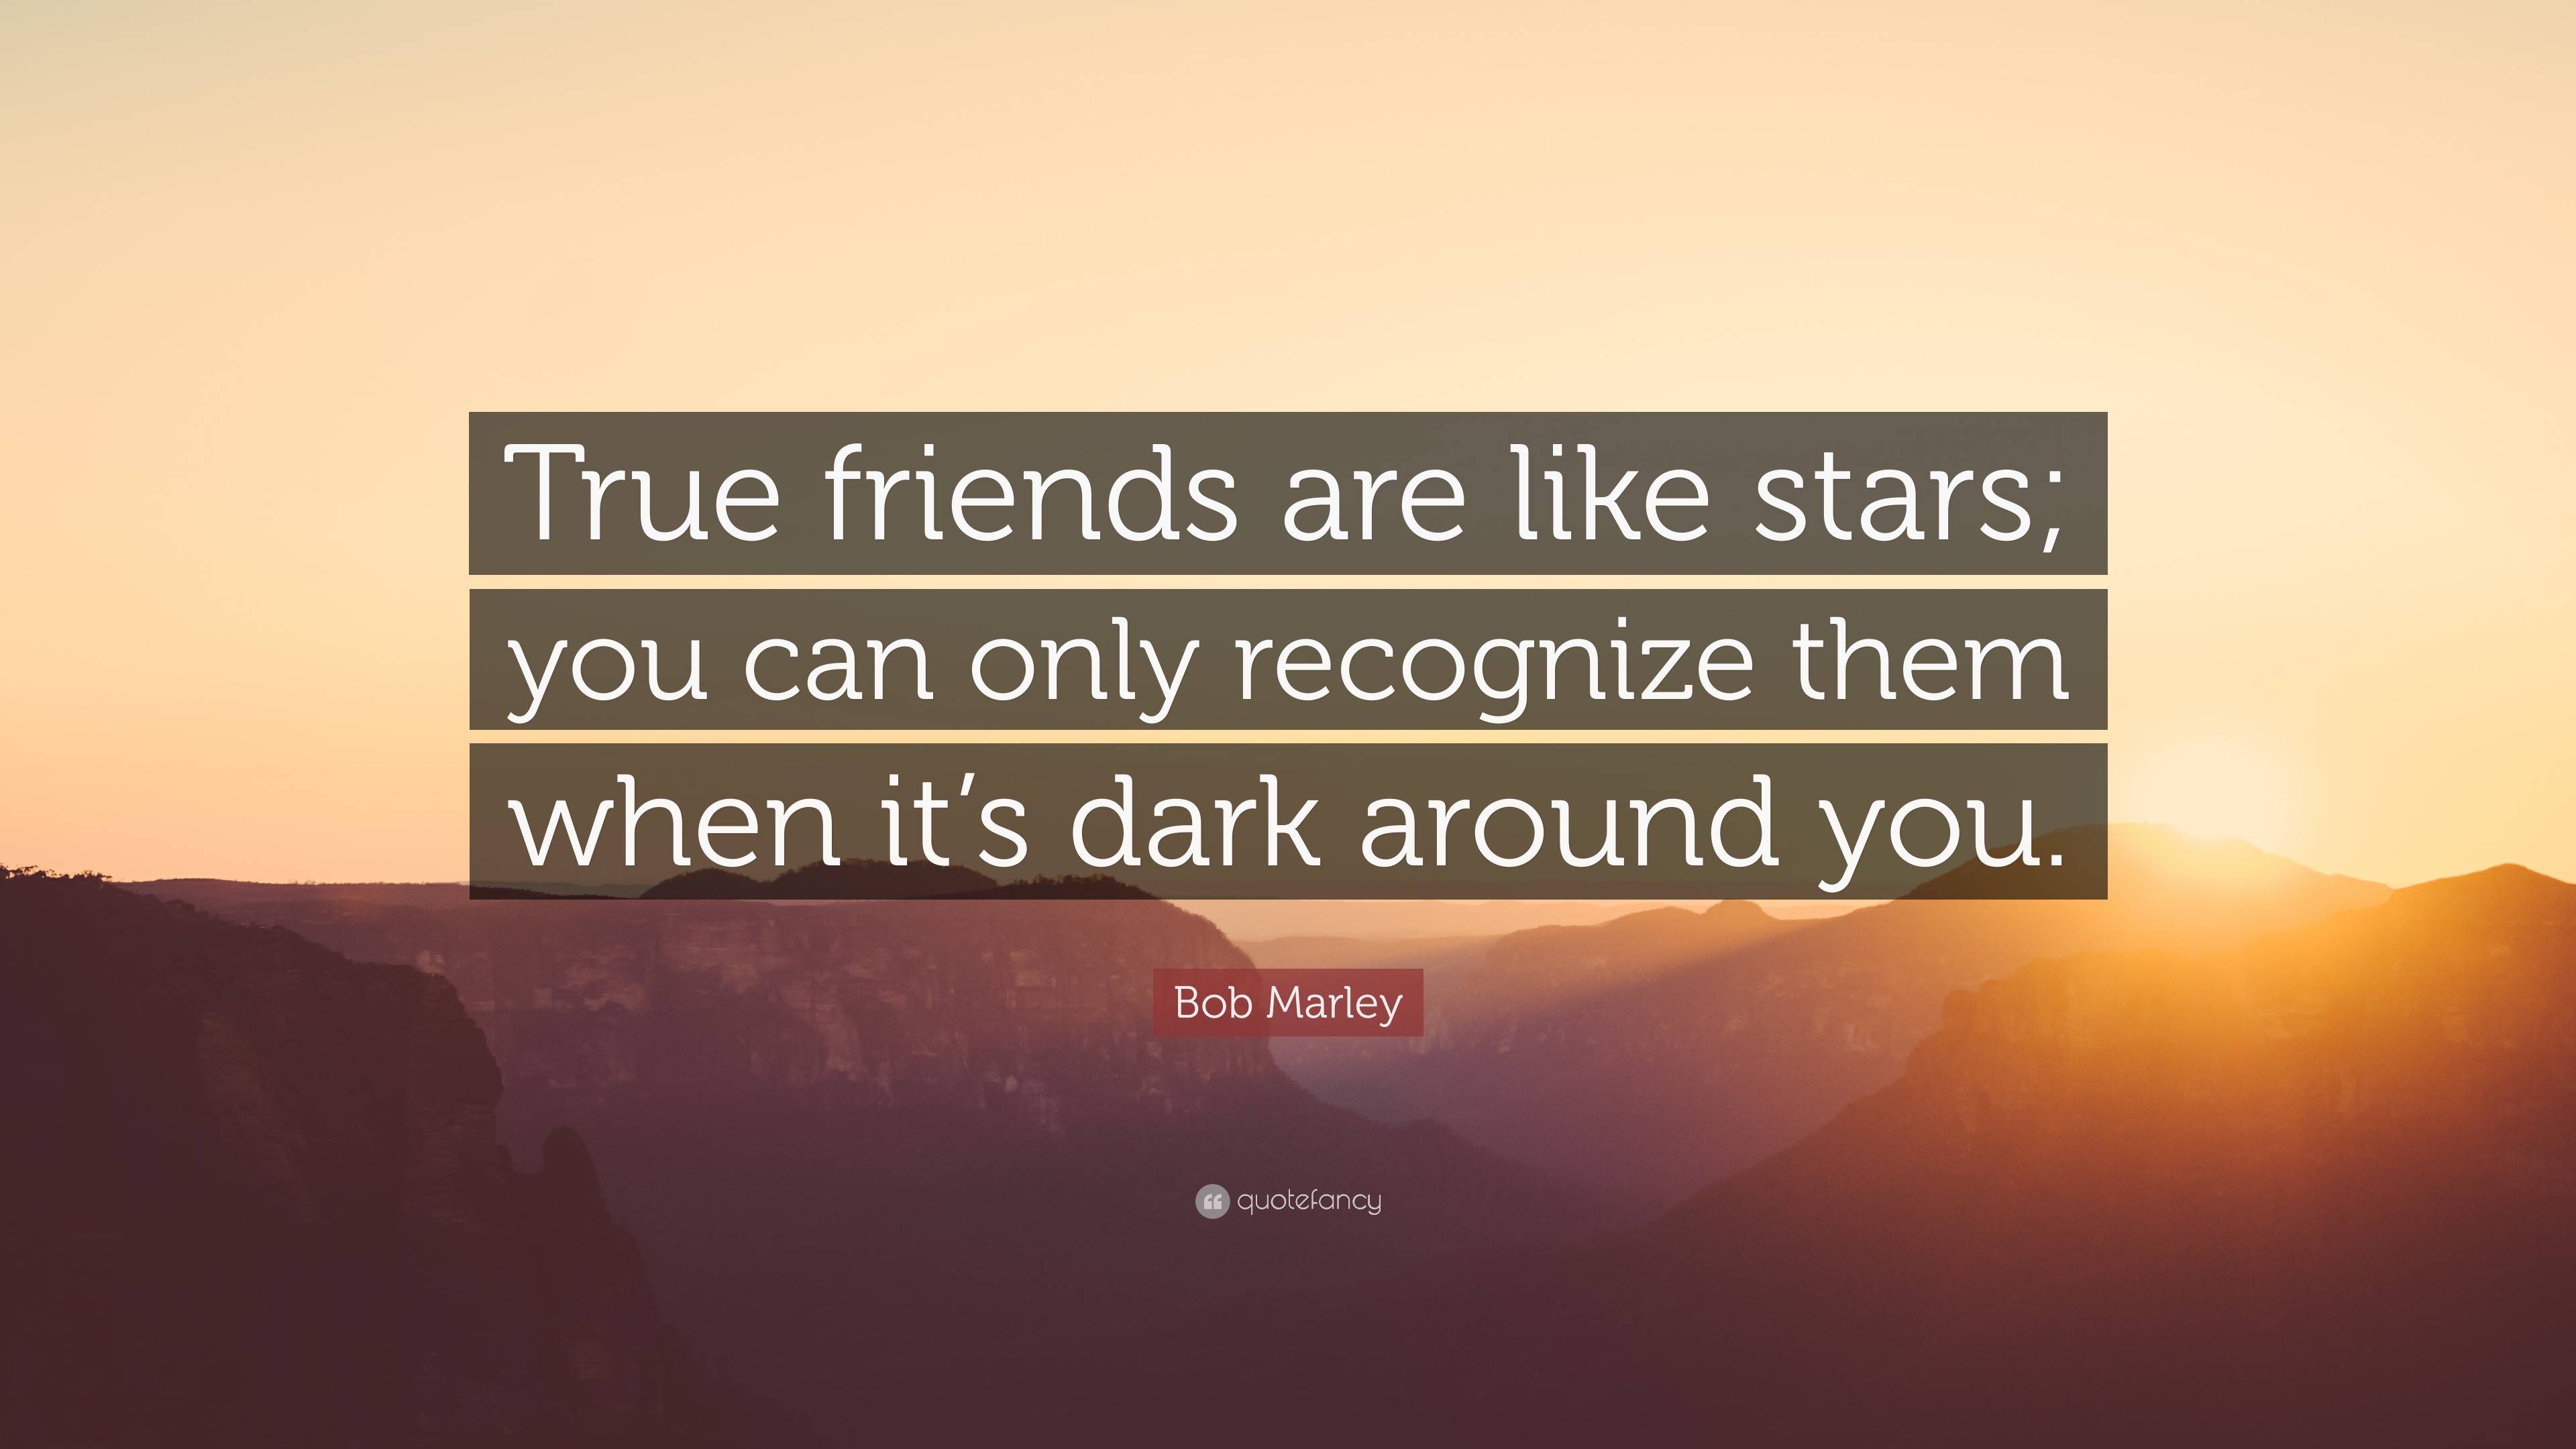 Bob Marley Quote: "True friends are like stars; you can only recognize them when it's dark ...